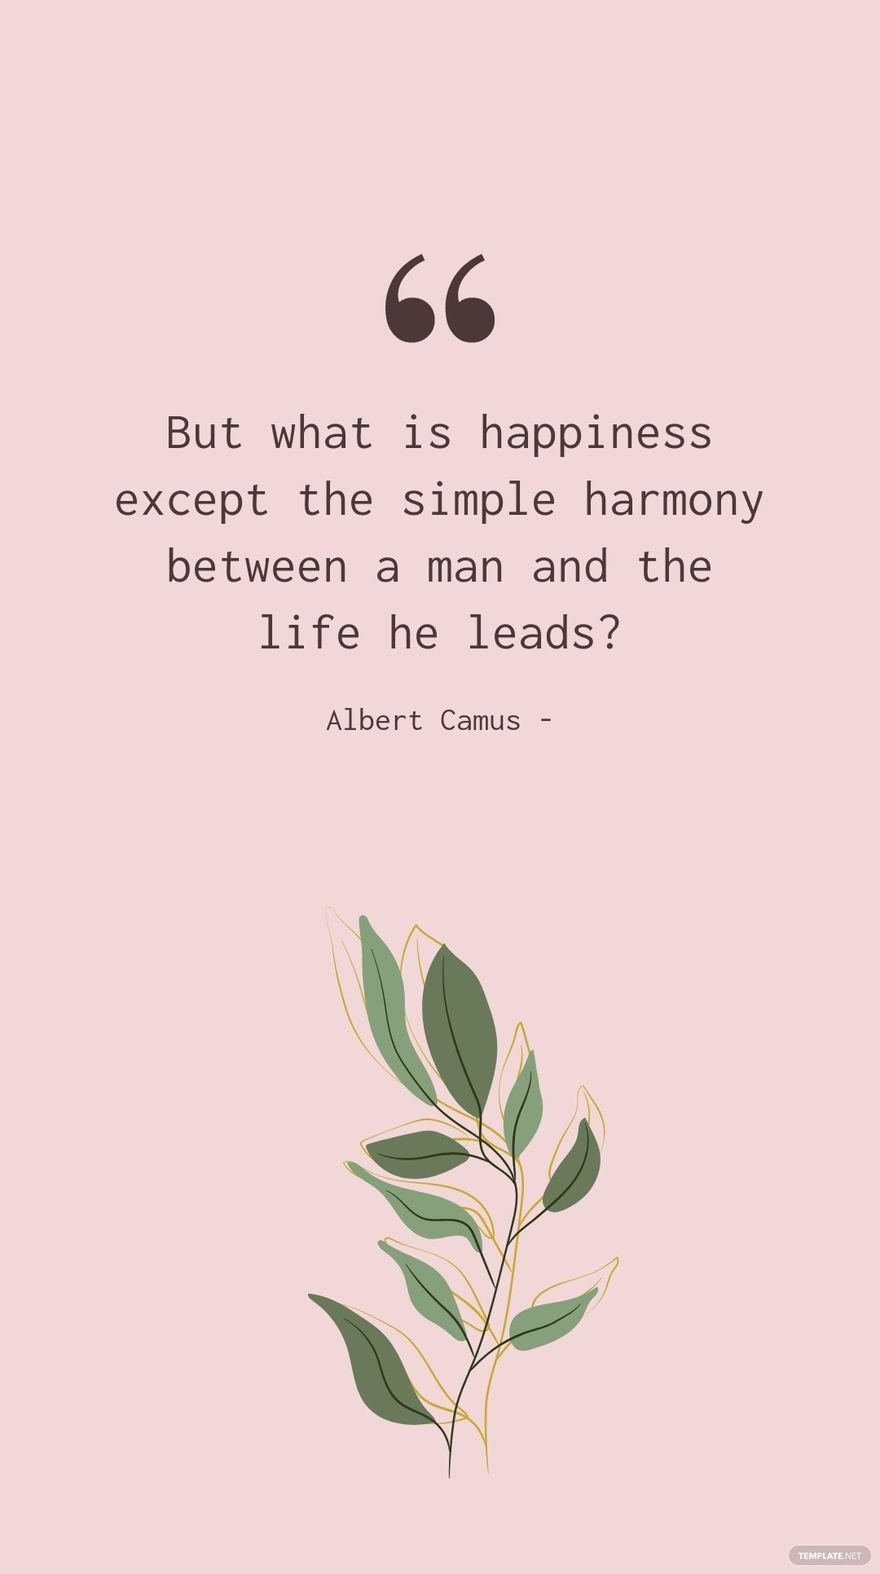 Albert Camus - But what is happiness except the simple harmony between a man and the life he leads?